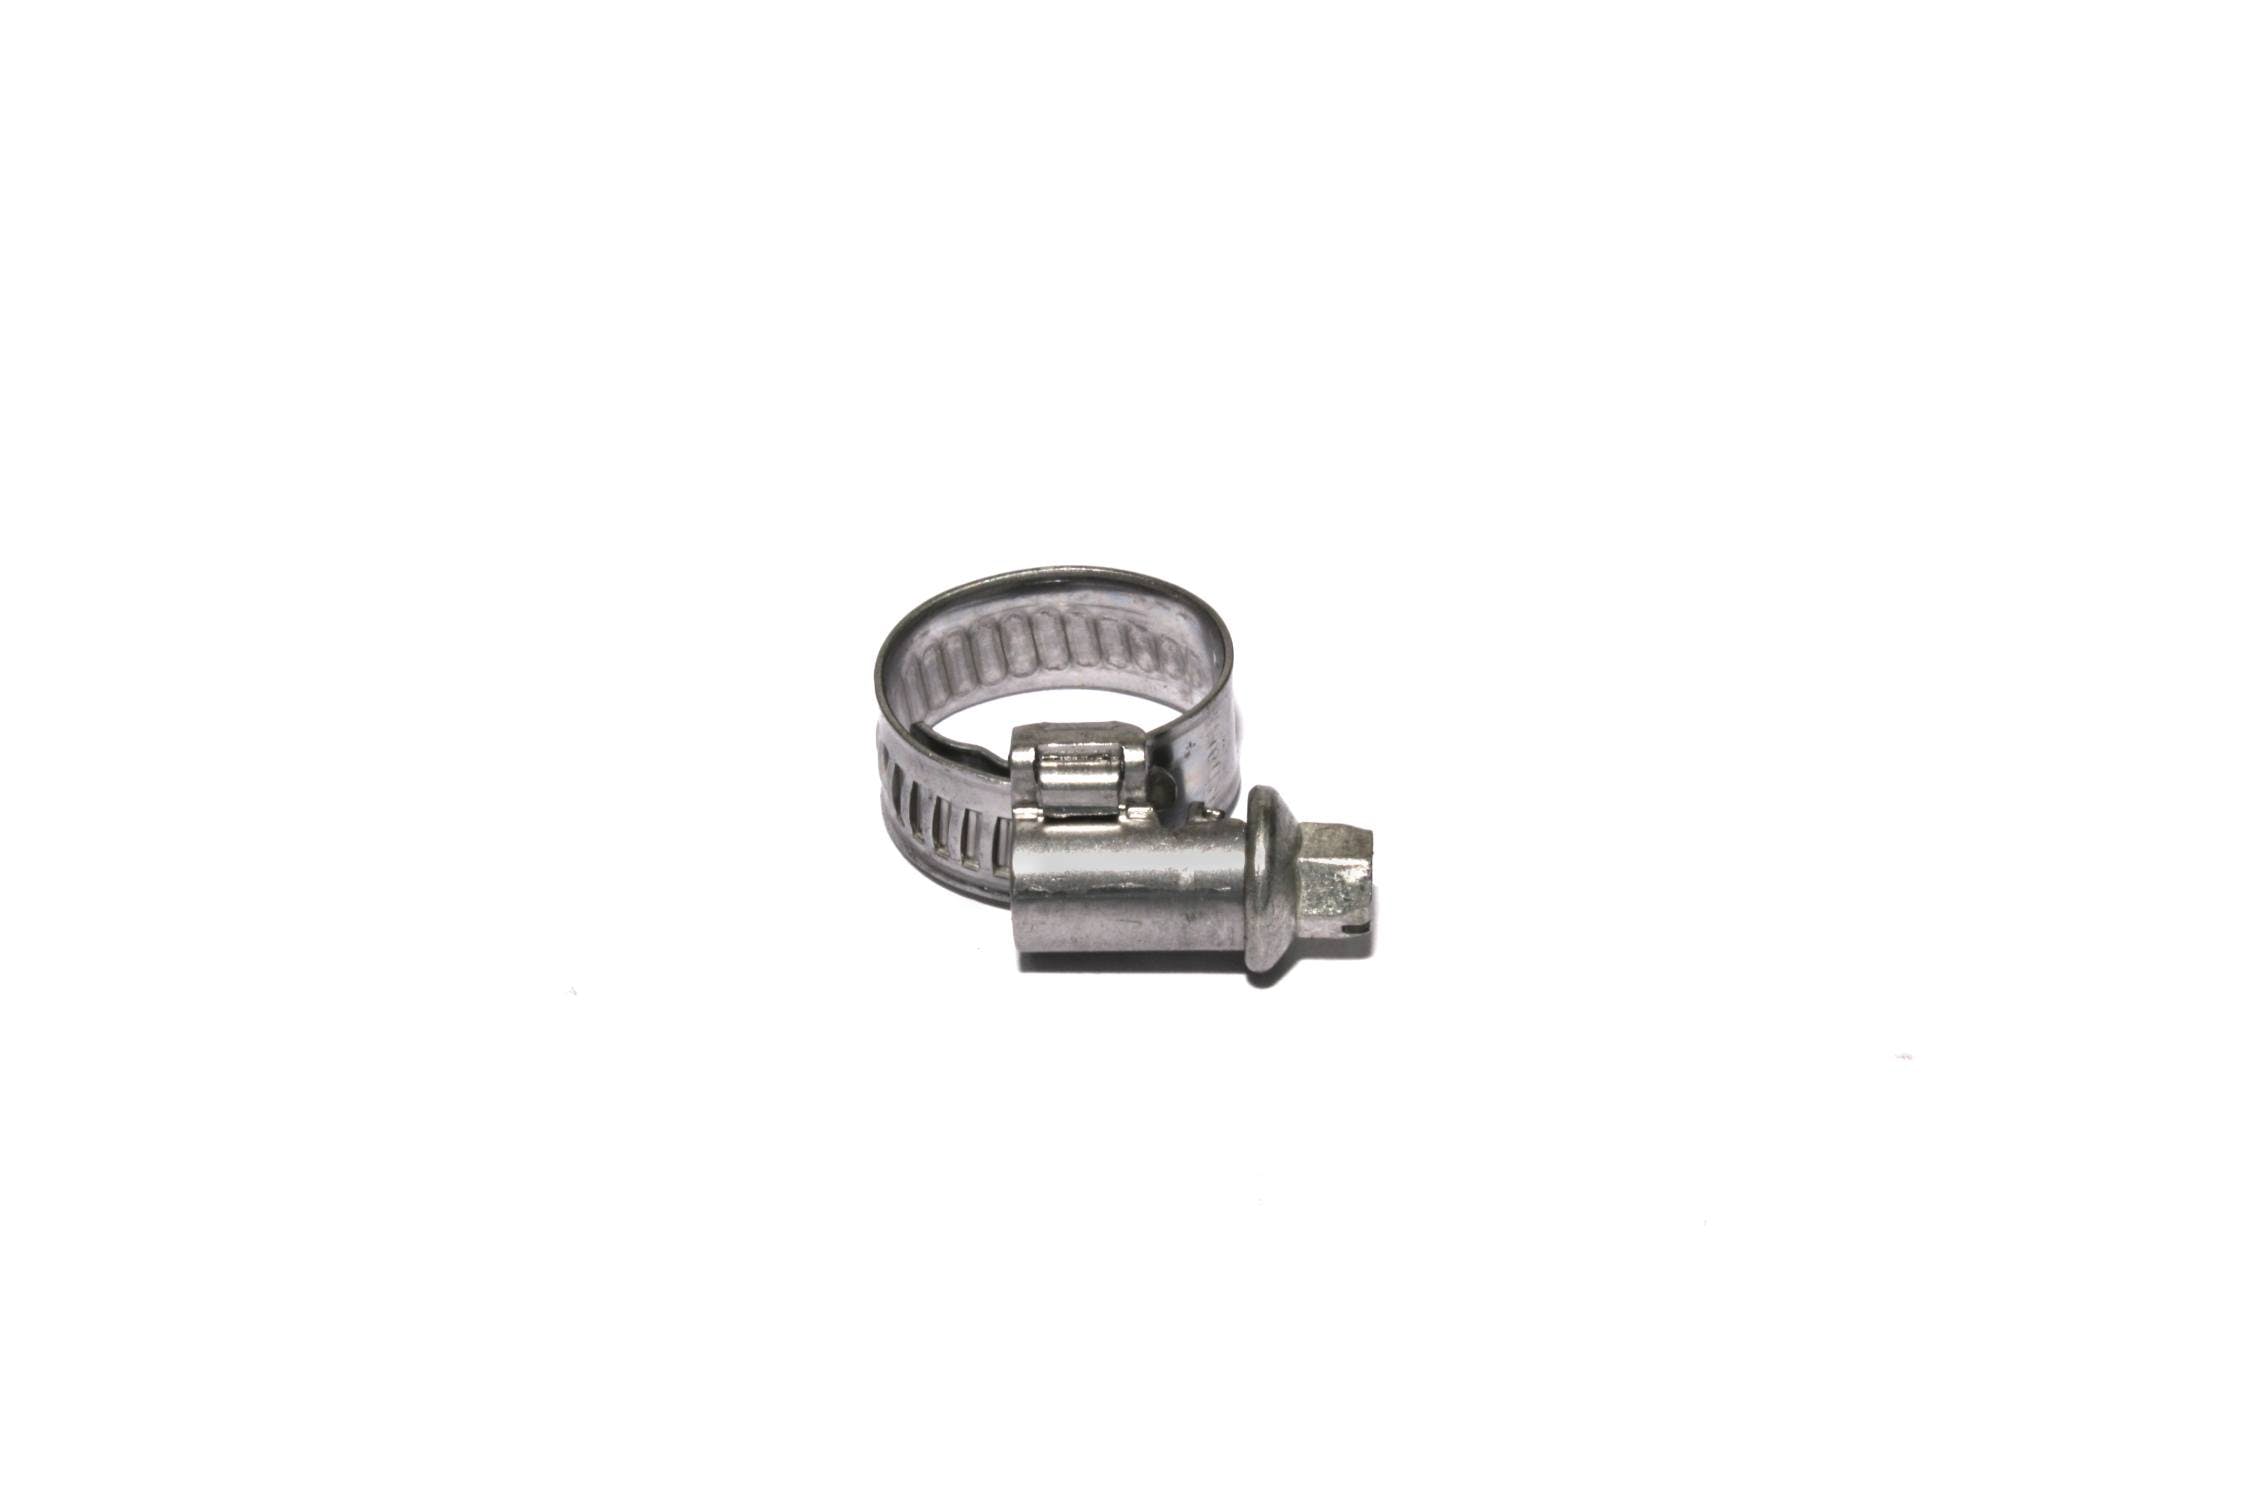 Competition Cams G3758-4 Gator Brand Performance Hose Clamps